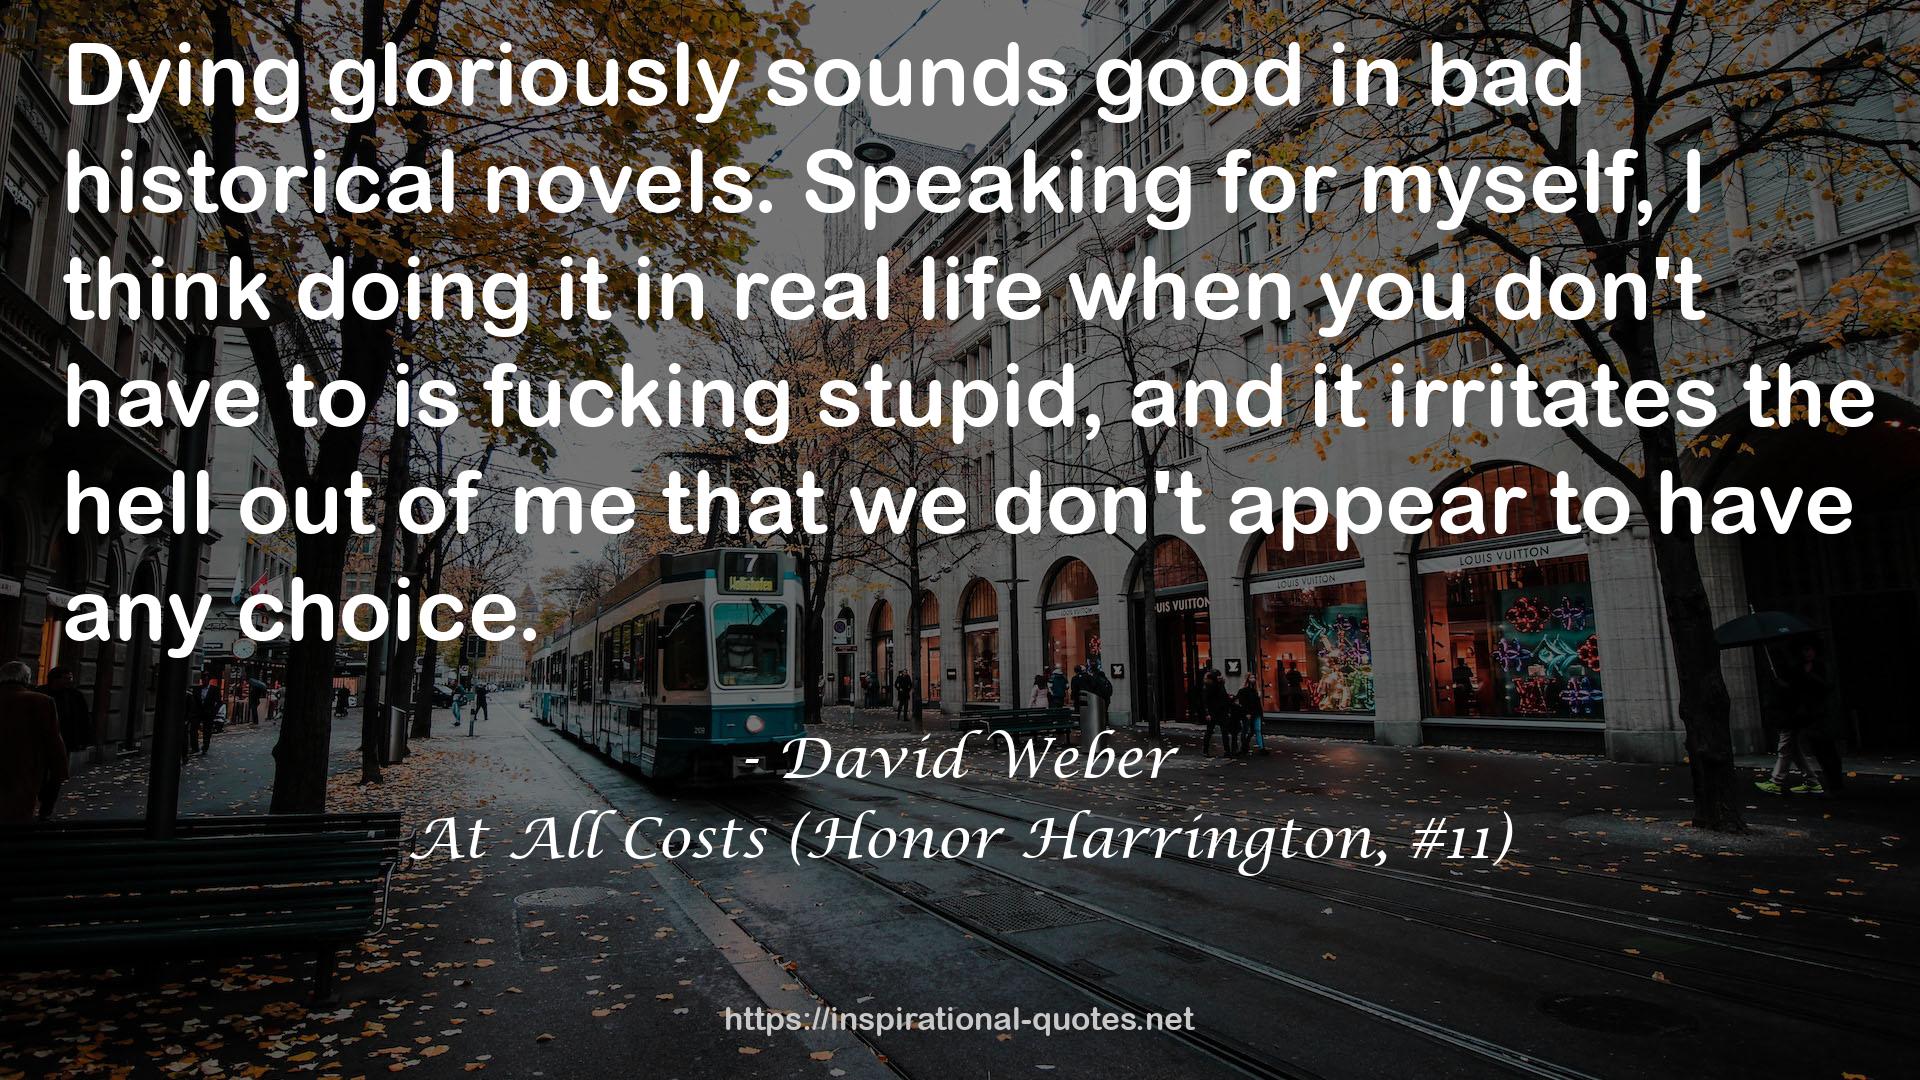 At All Costs (Honor Harrington, #11) QUOTES